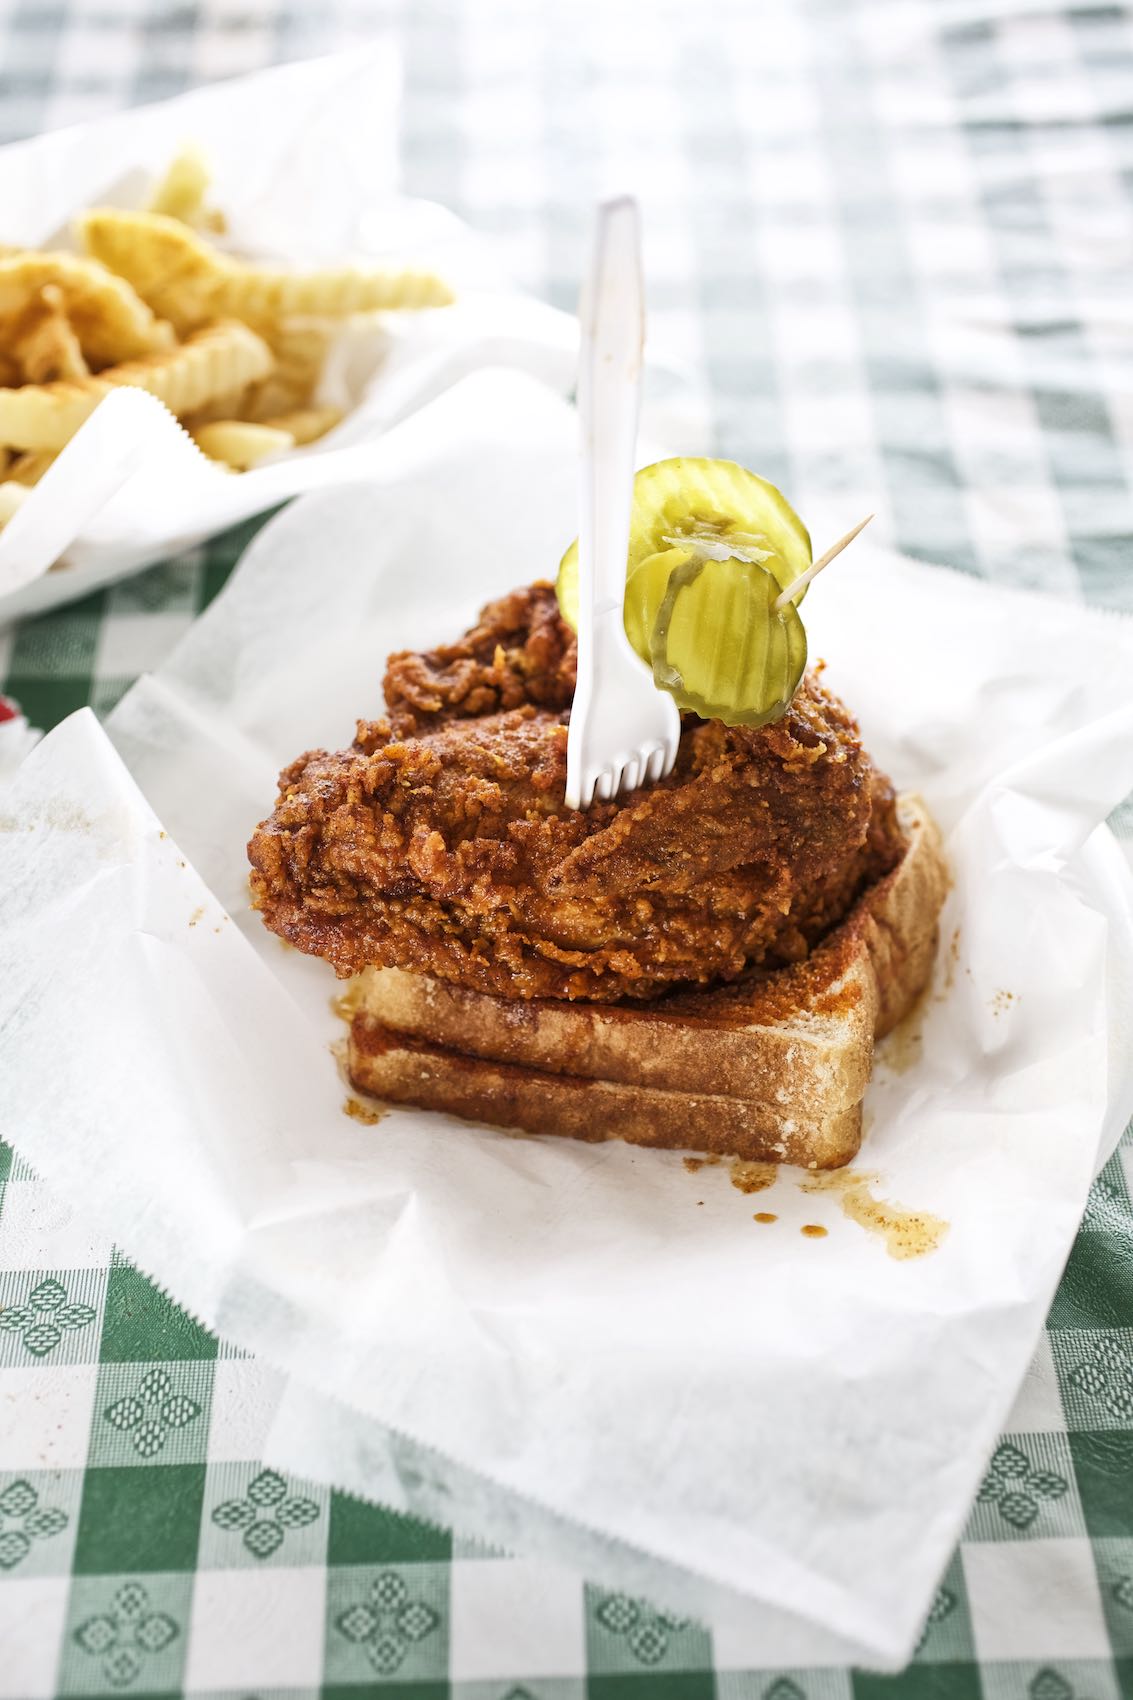 Jody Horton Photography - Fried chicken with bread and pickles on checkered picnic table. 